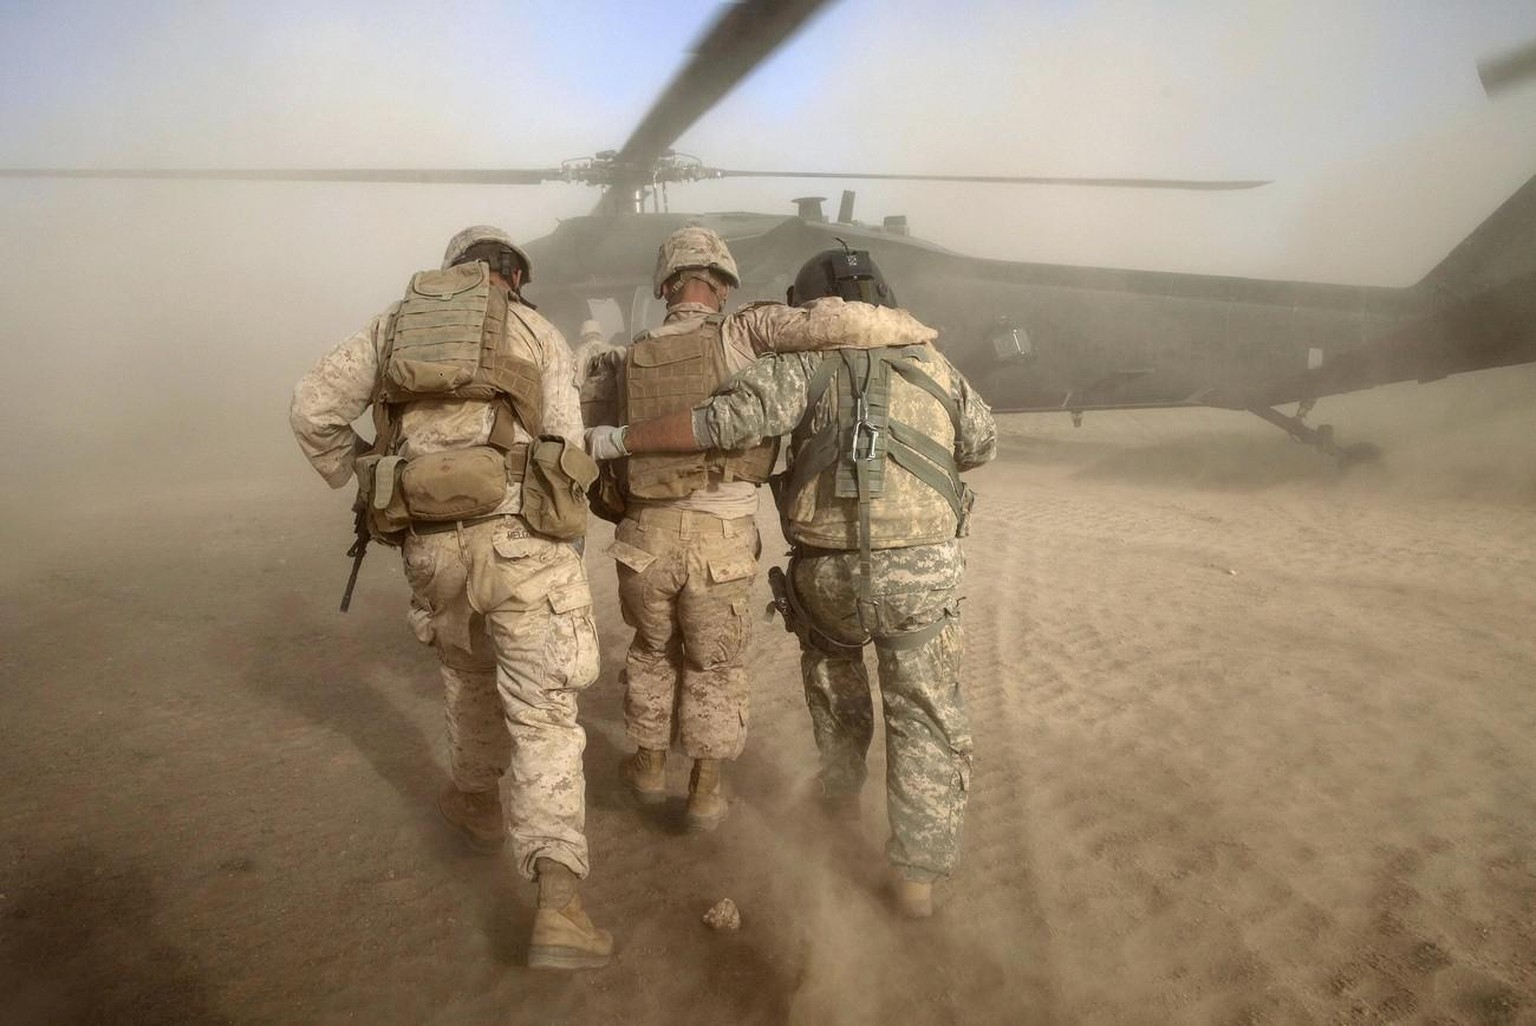 In this picture taken Sunday, May 15, 2011, U.S. Army flight medic SGT Jaime Adame, right, and an unidentified United States Marine help Marine LCPL Chris Propst of South Carolina, center, who was wou ...